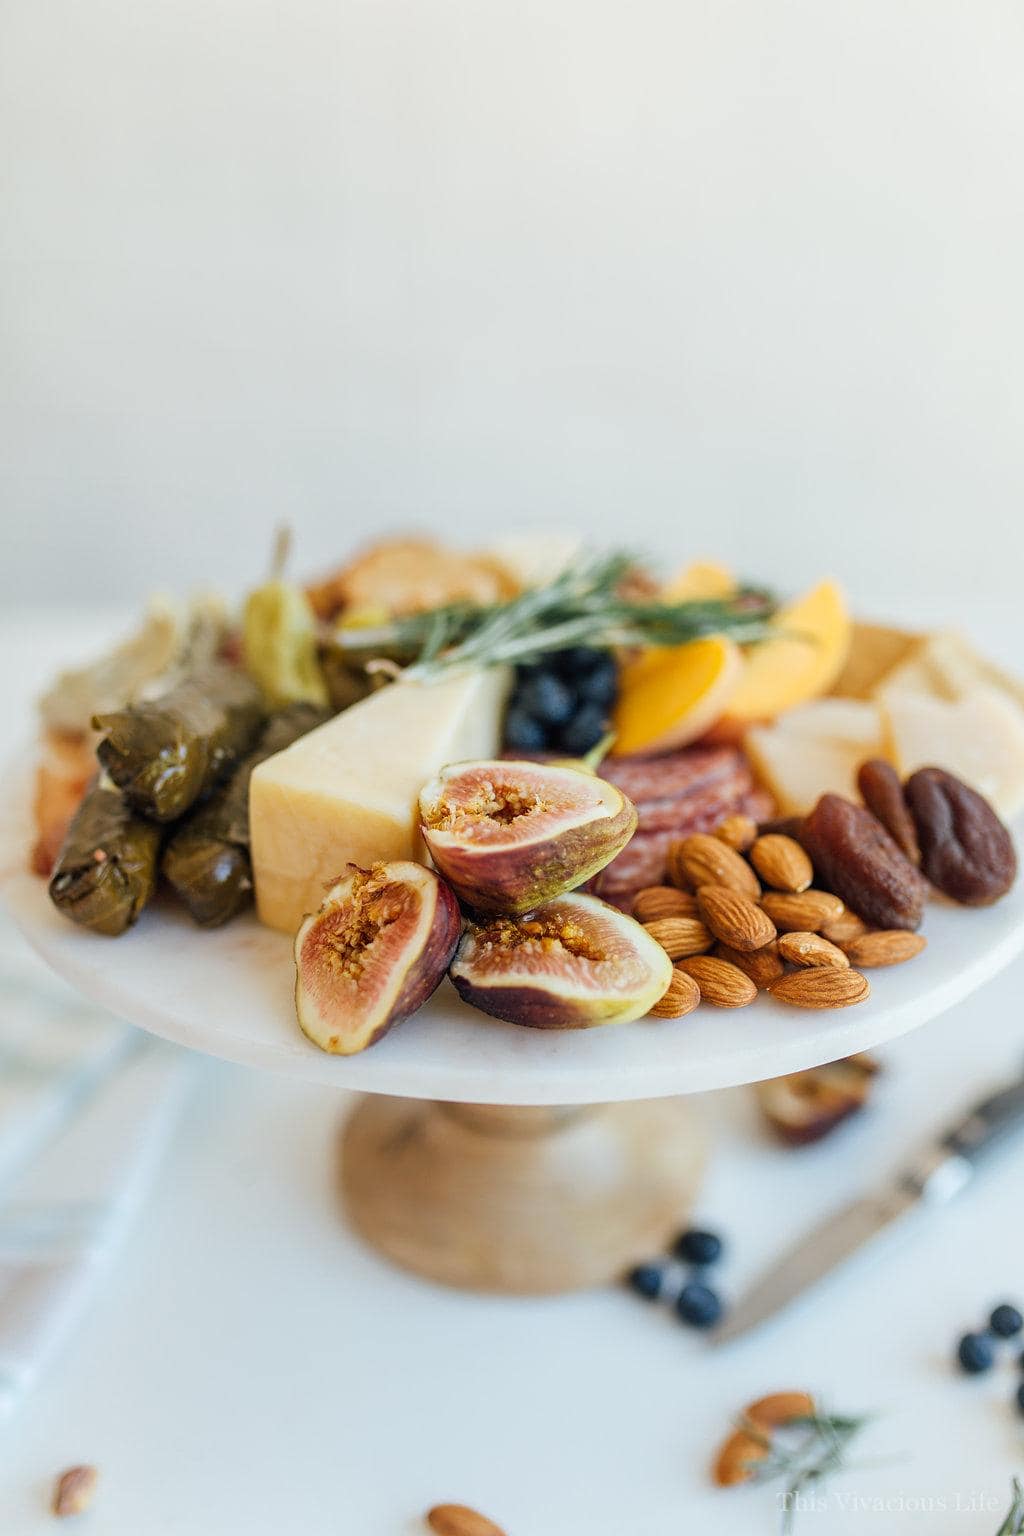 Gluten-Free Charcuterie and Cheeseboard Perfect for Entertaining | gluten free entertaining tips | how to entertain gluten free | gluten free appetizer ideas | gluten free charcuterie tips | how to create gluten free charcuterie | gluten free cheeseboard | gluten free snack recipes || This Vivacious Life